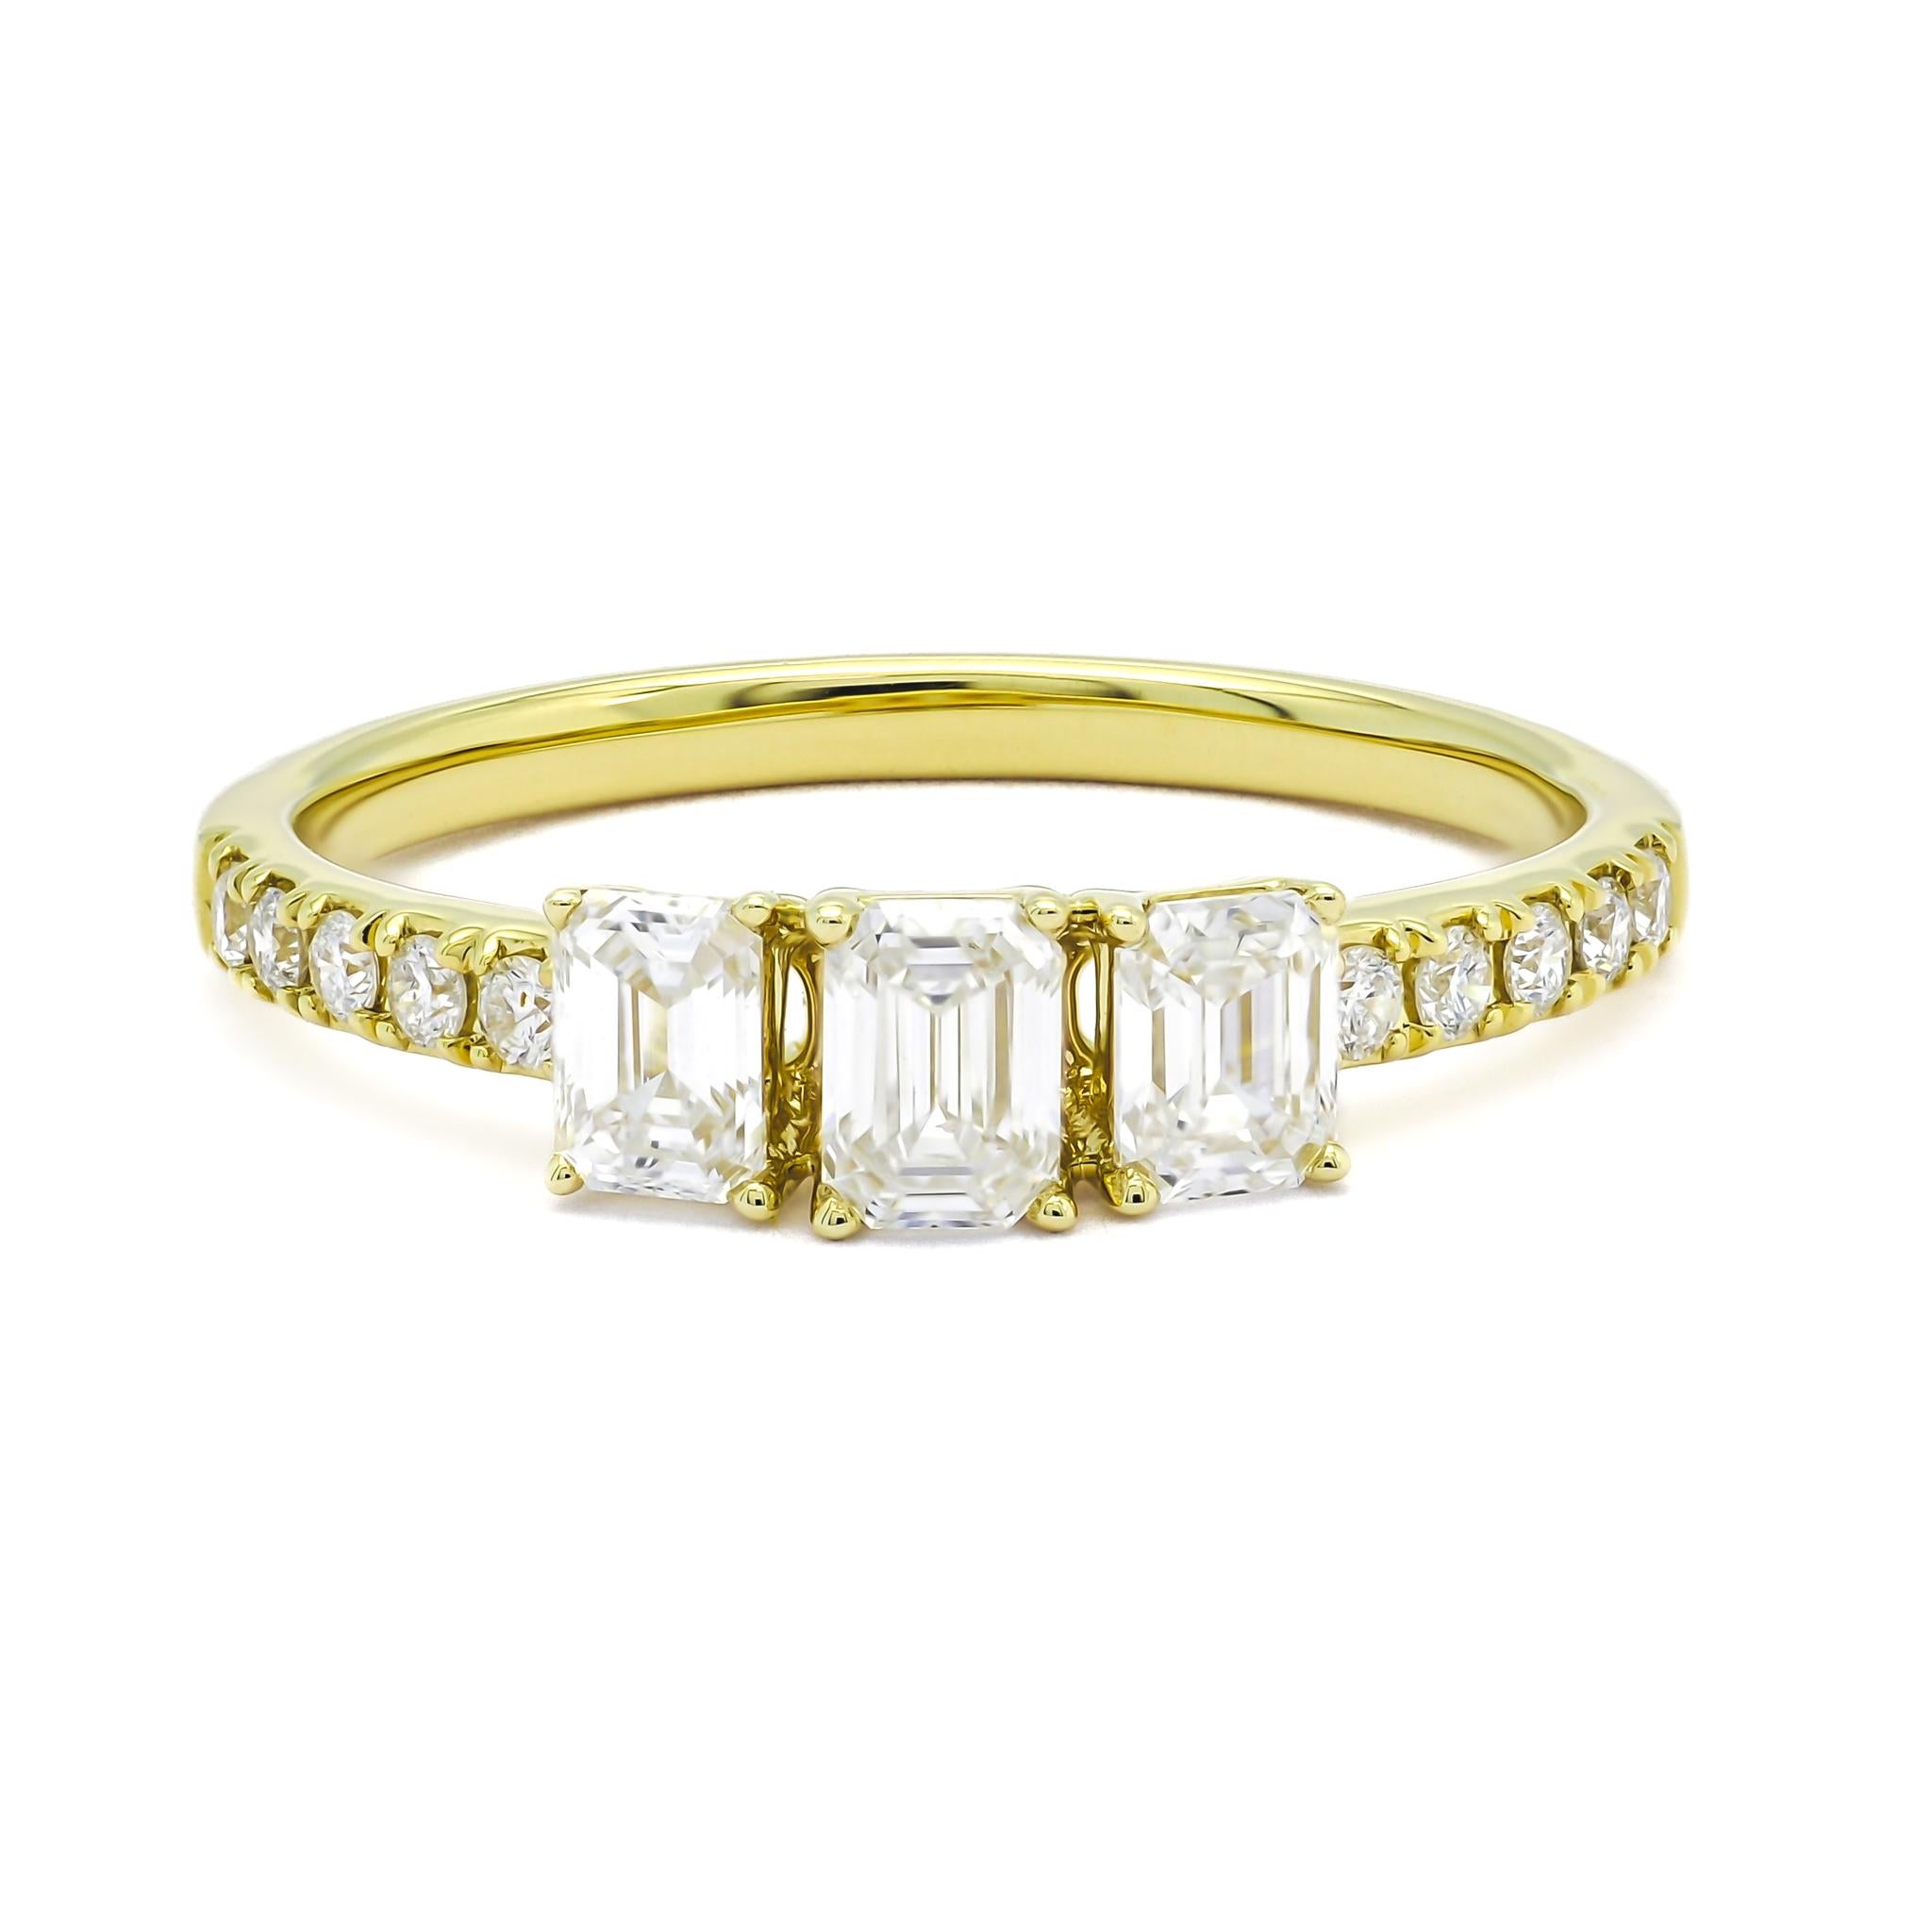  Natural Diamonds 0.80 CT 18KT Yellow Gold Emerald Cut Trilogy Anniversary Ring  In New Condition For Sale In Antwerpen, BE